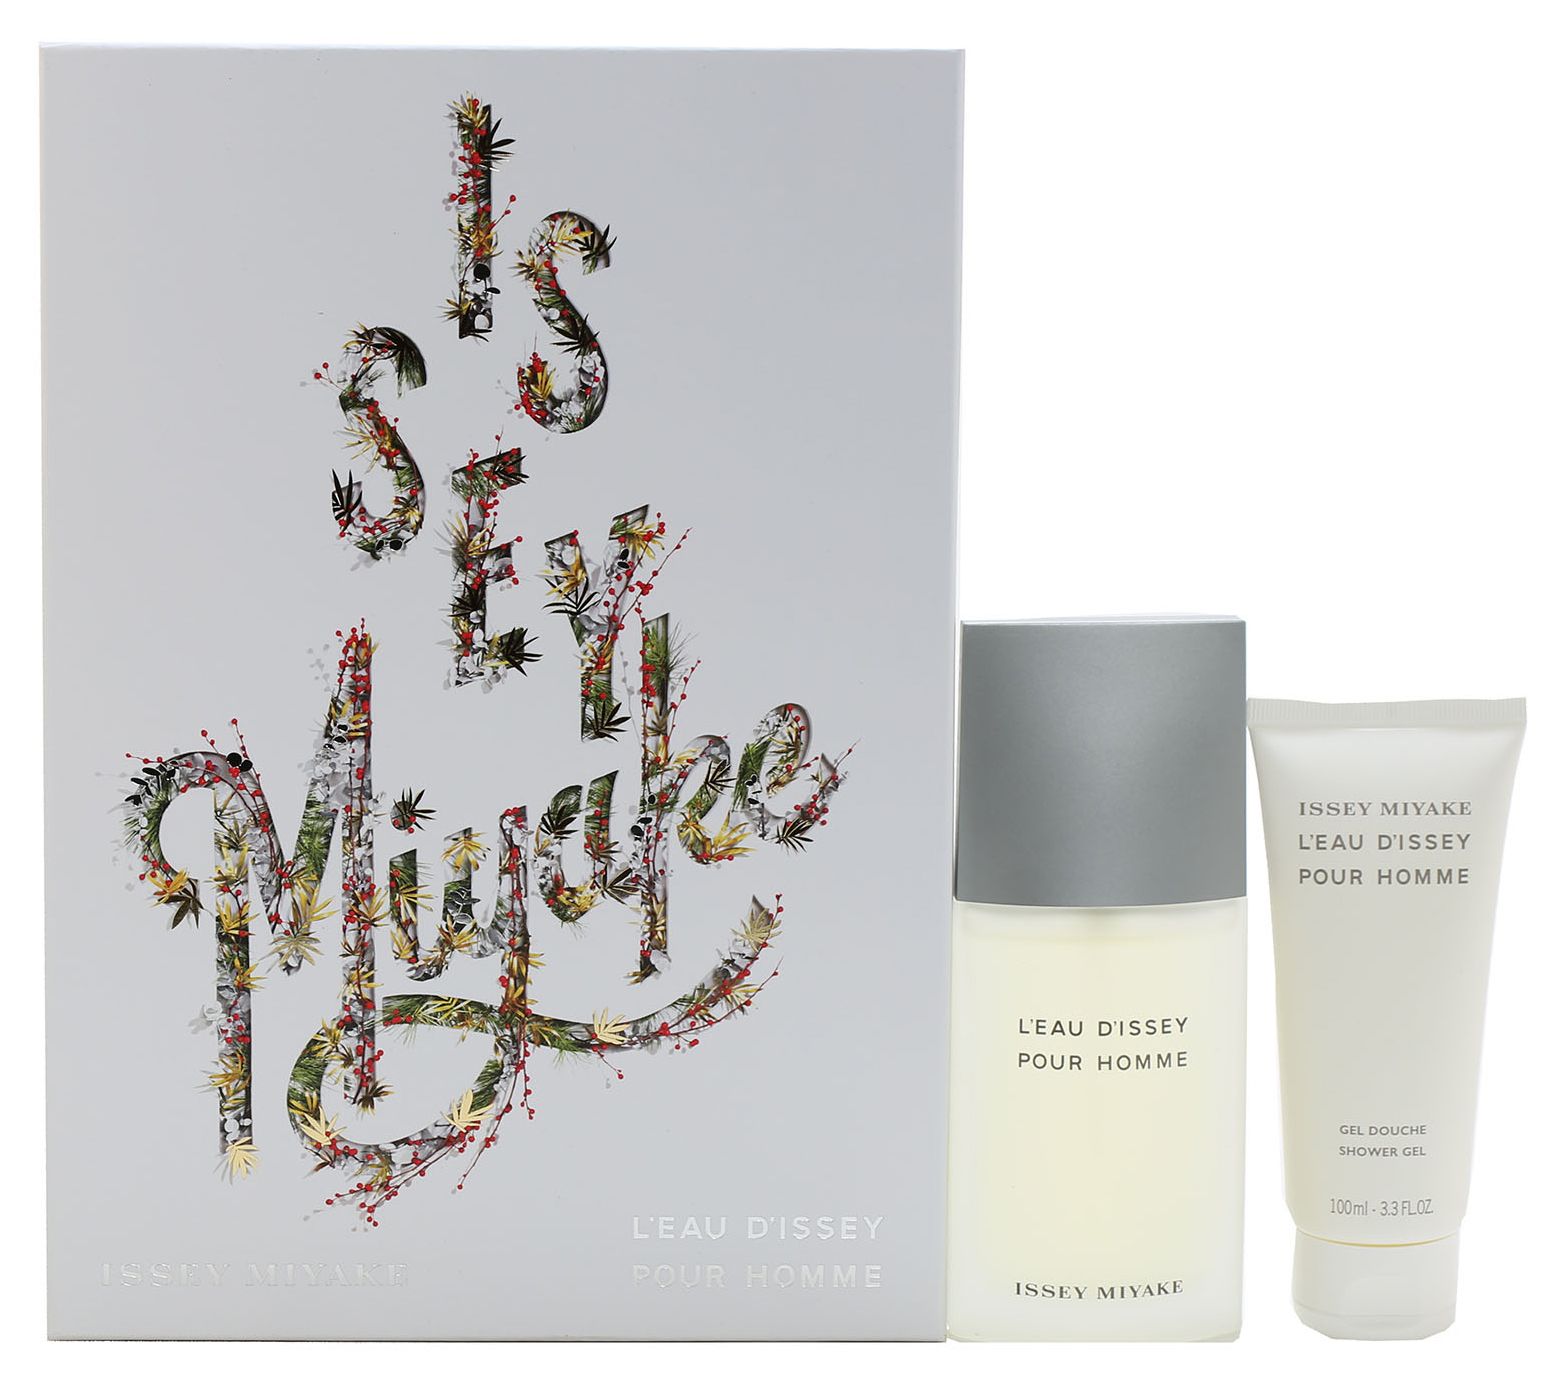 L'eau D'Issey by Issey Miyake 3pc Gift Set EDT 4.2 oz + Shower Gel 2.5 oz +  After Shave Balm 2.5 oz - ForeverLux